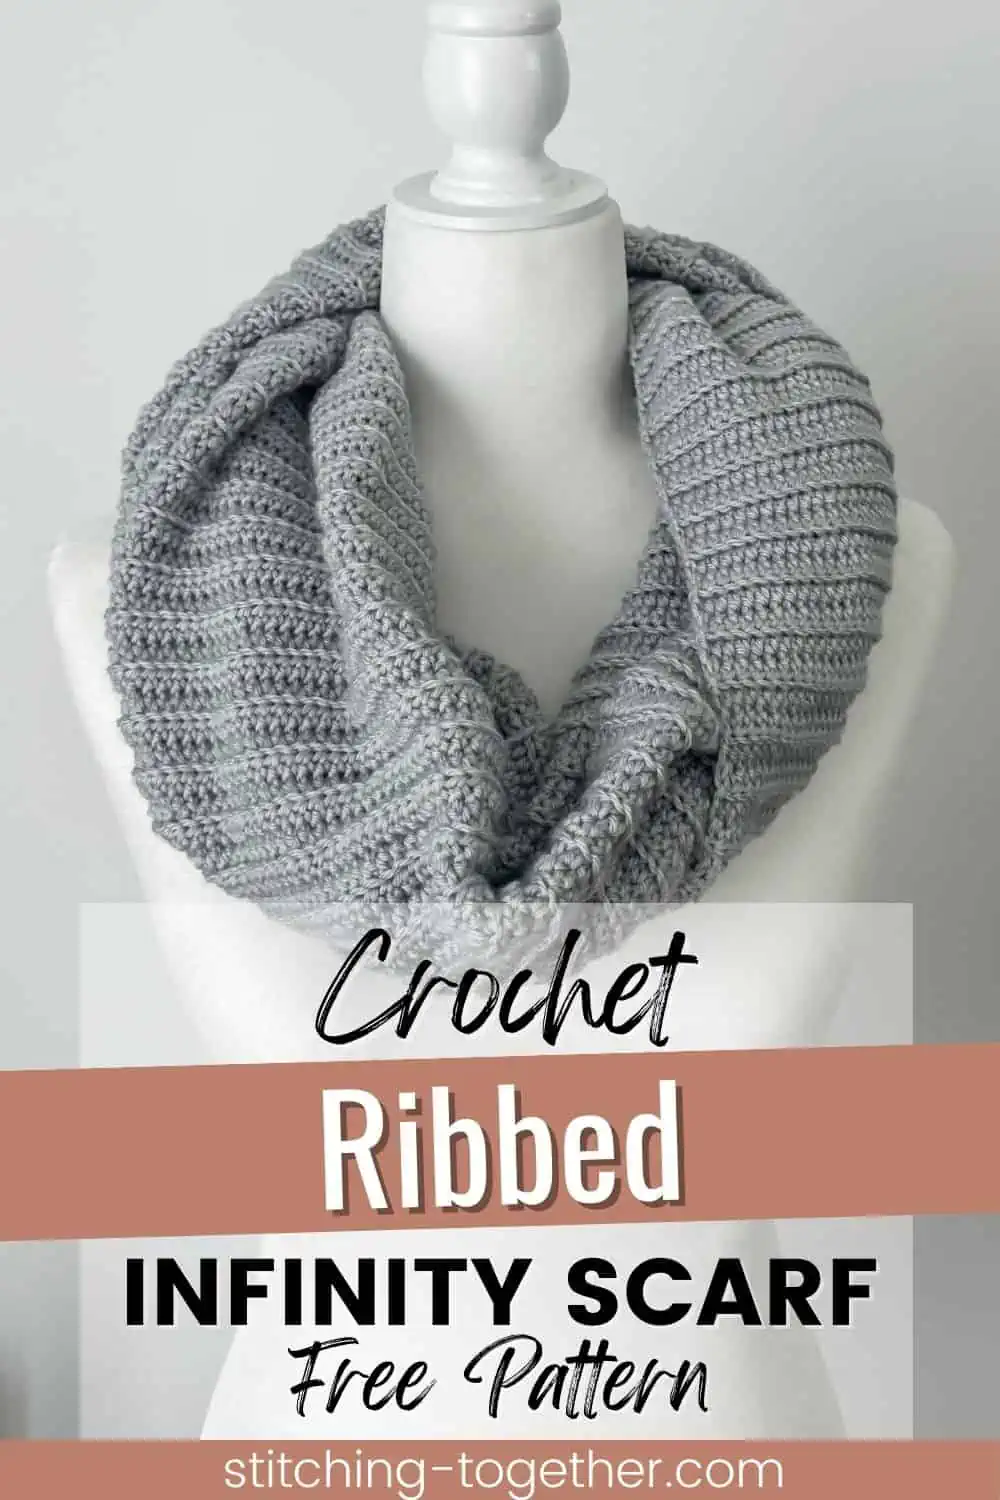 graphic reading "crochet ribbed infinity scarf free pattern' with an image of a gray crochet infinity scarf on the neck of a mannequin